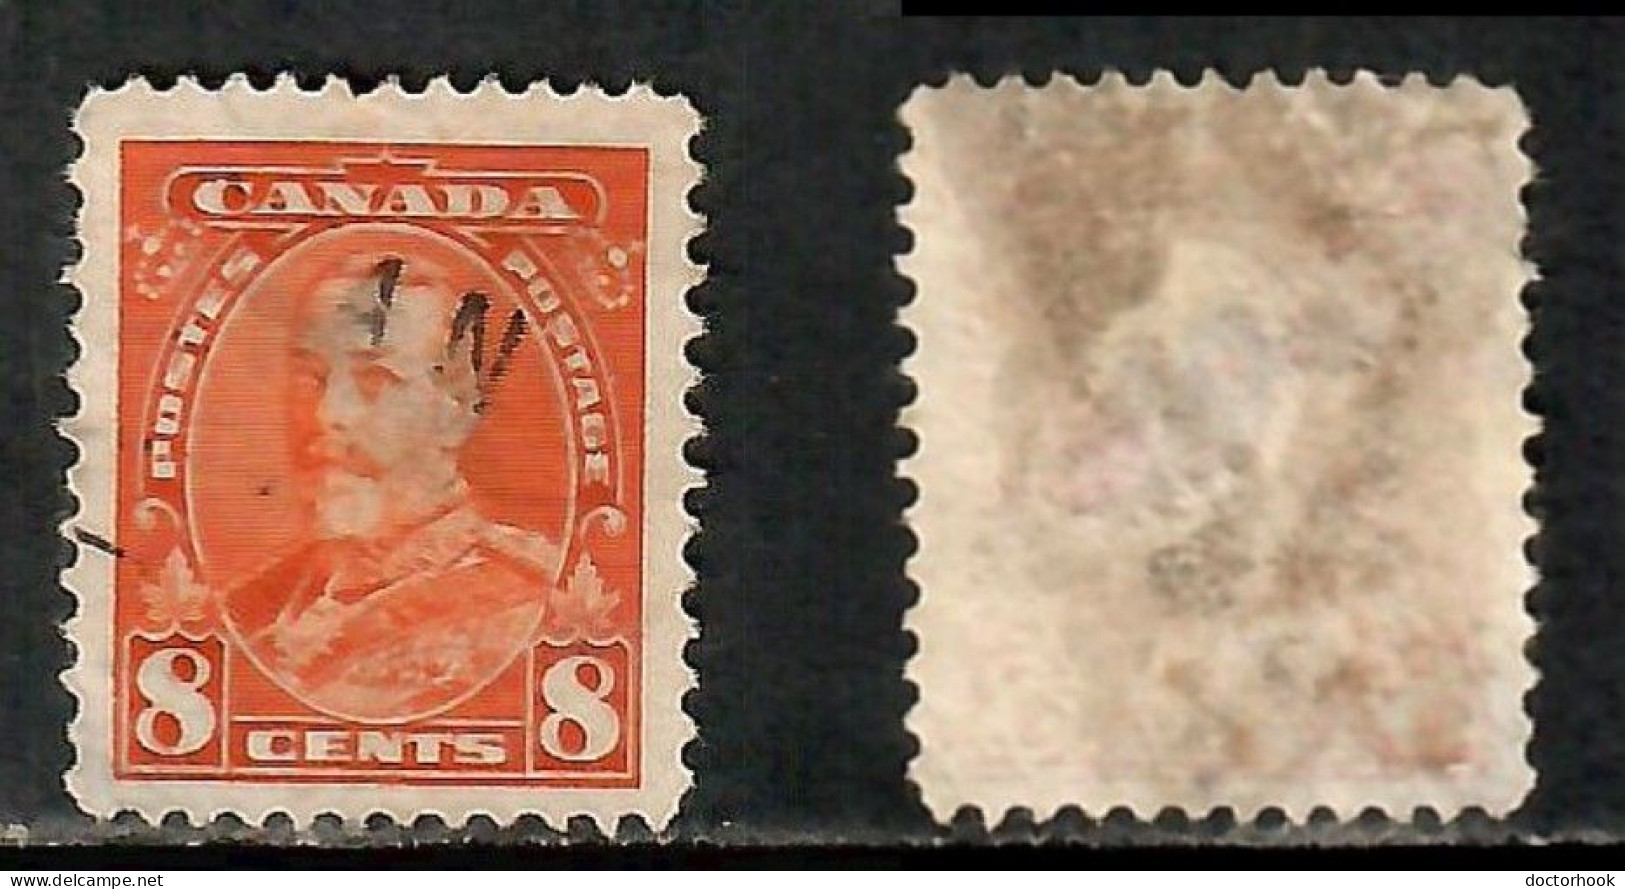 CANADA   Scott # 222 USED (CONDITION AS PER SCAN) (CAN-196) - Oblitérés